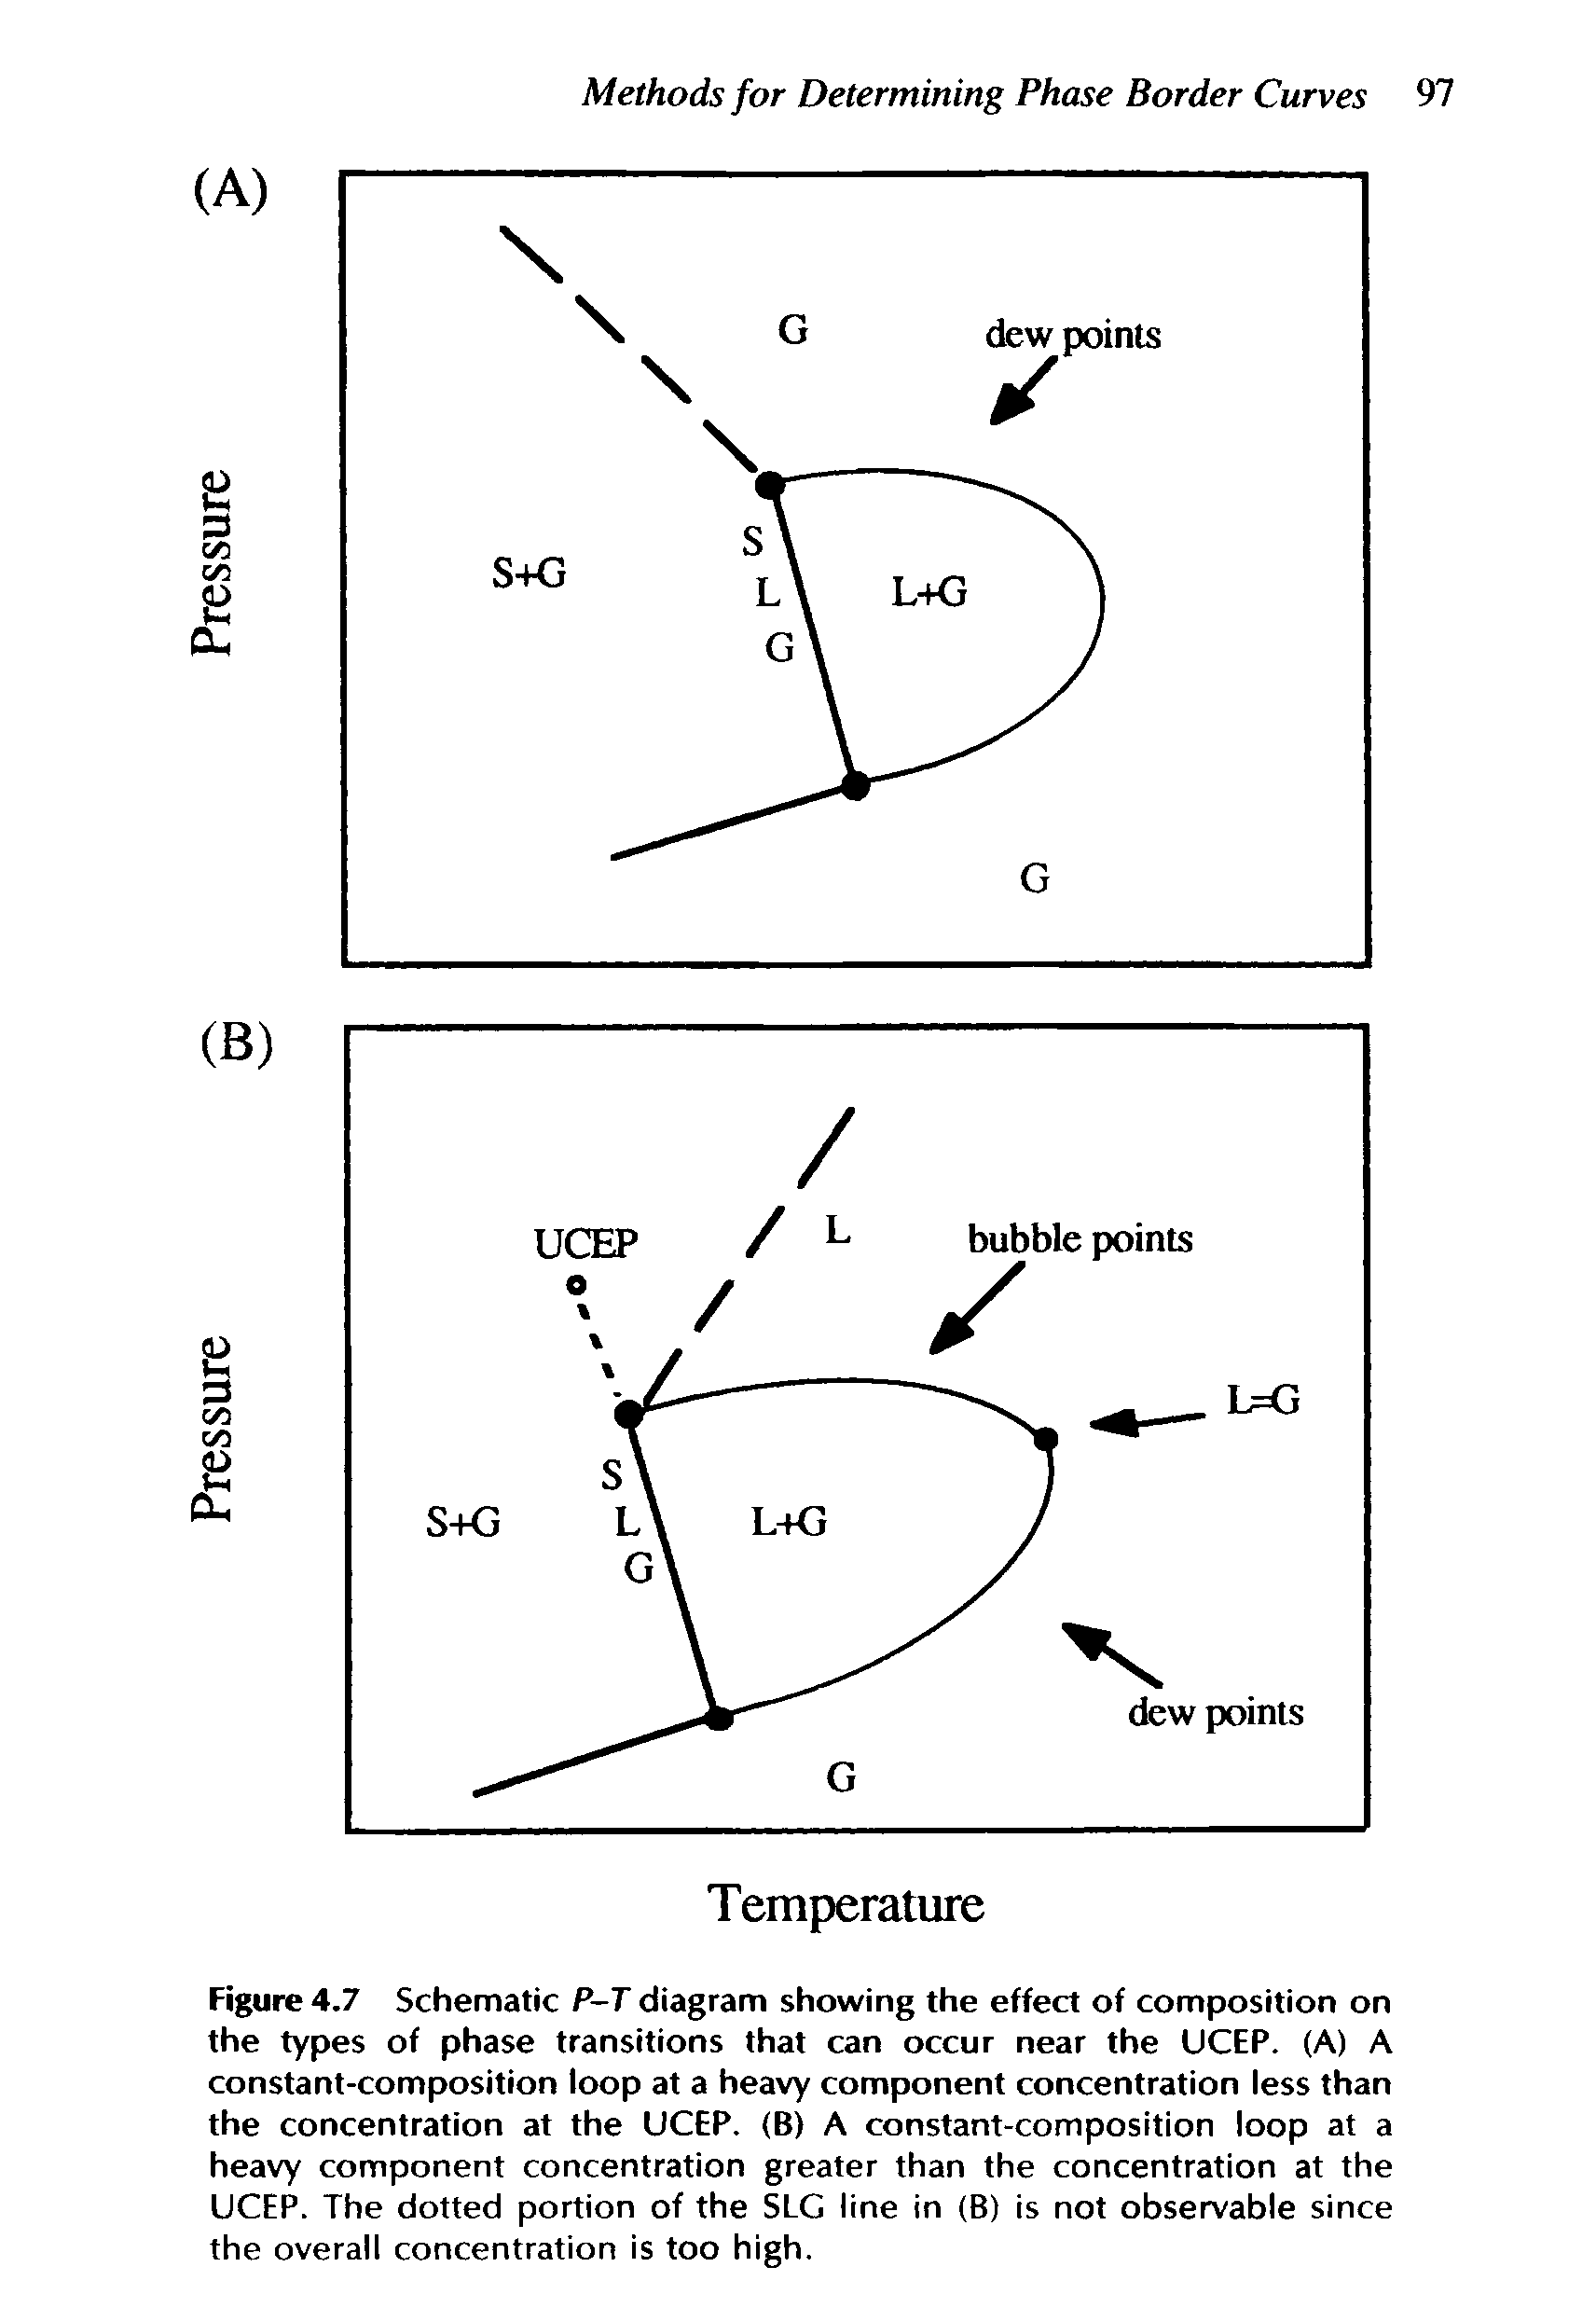 Figure 4.7 Schematic P-T diagram showing the effect of composition on the types of phase transitions that can occur near the UCEP. (A) A constant-composition loop at a heavy component concentration less than the concentration at the UCEP. (B) A constant-composition loop at a heavy component concentration greater than the concentration at the UCEP. The dotted portion of the SLG line in (B) is not observable since the overall concentration is too high.